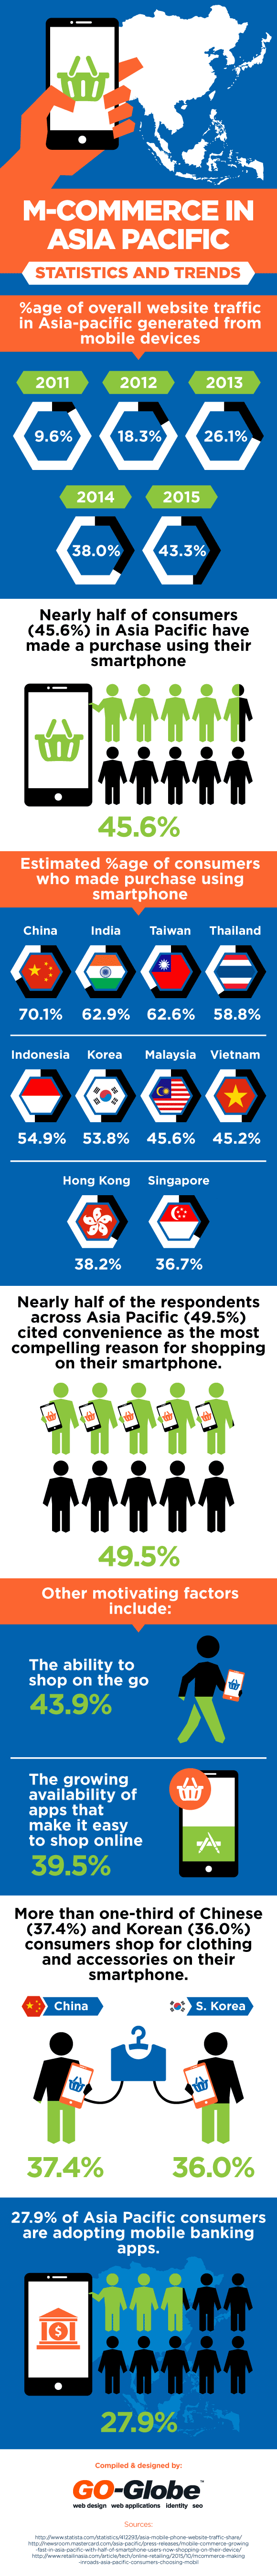 Chinese m-commerce vs. Asia Pacific